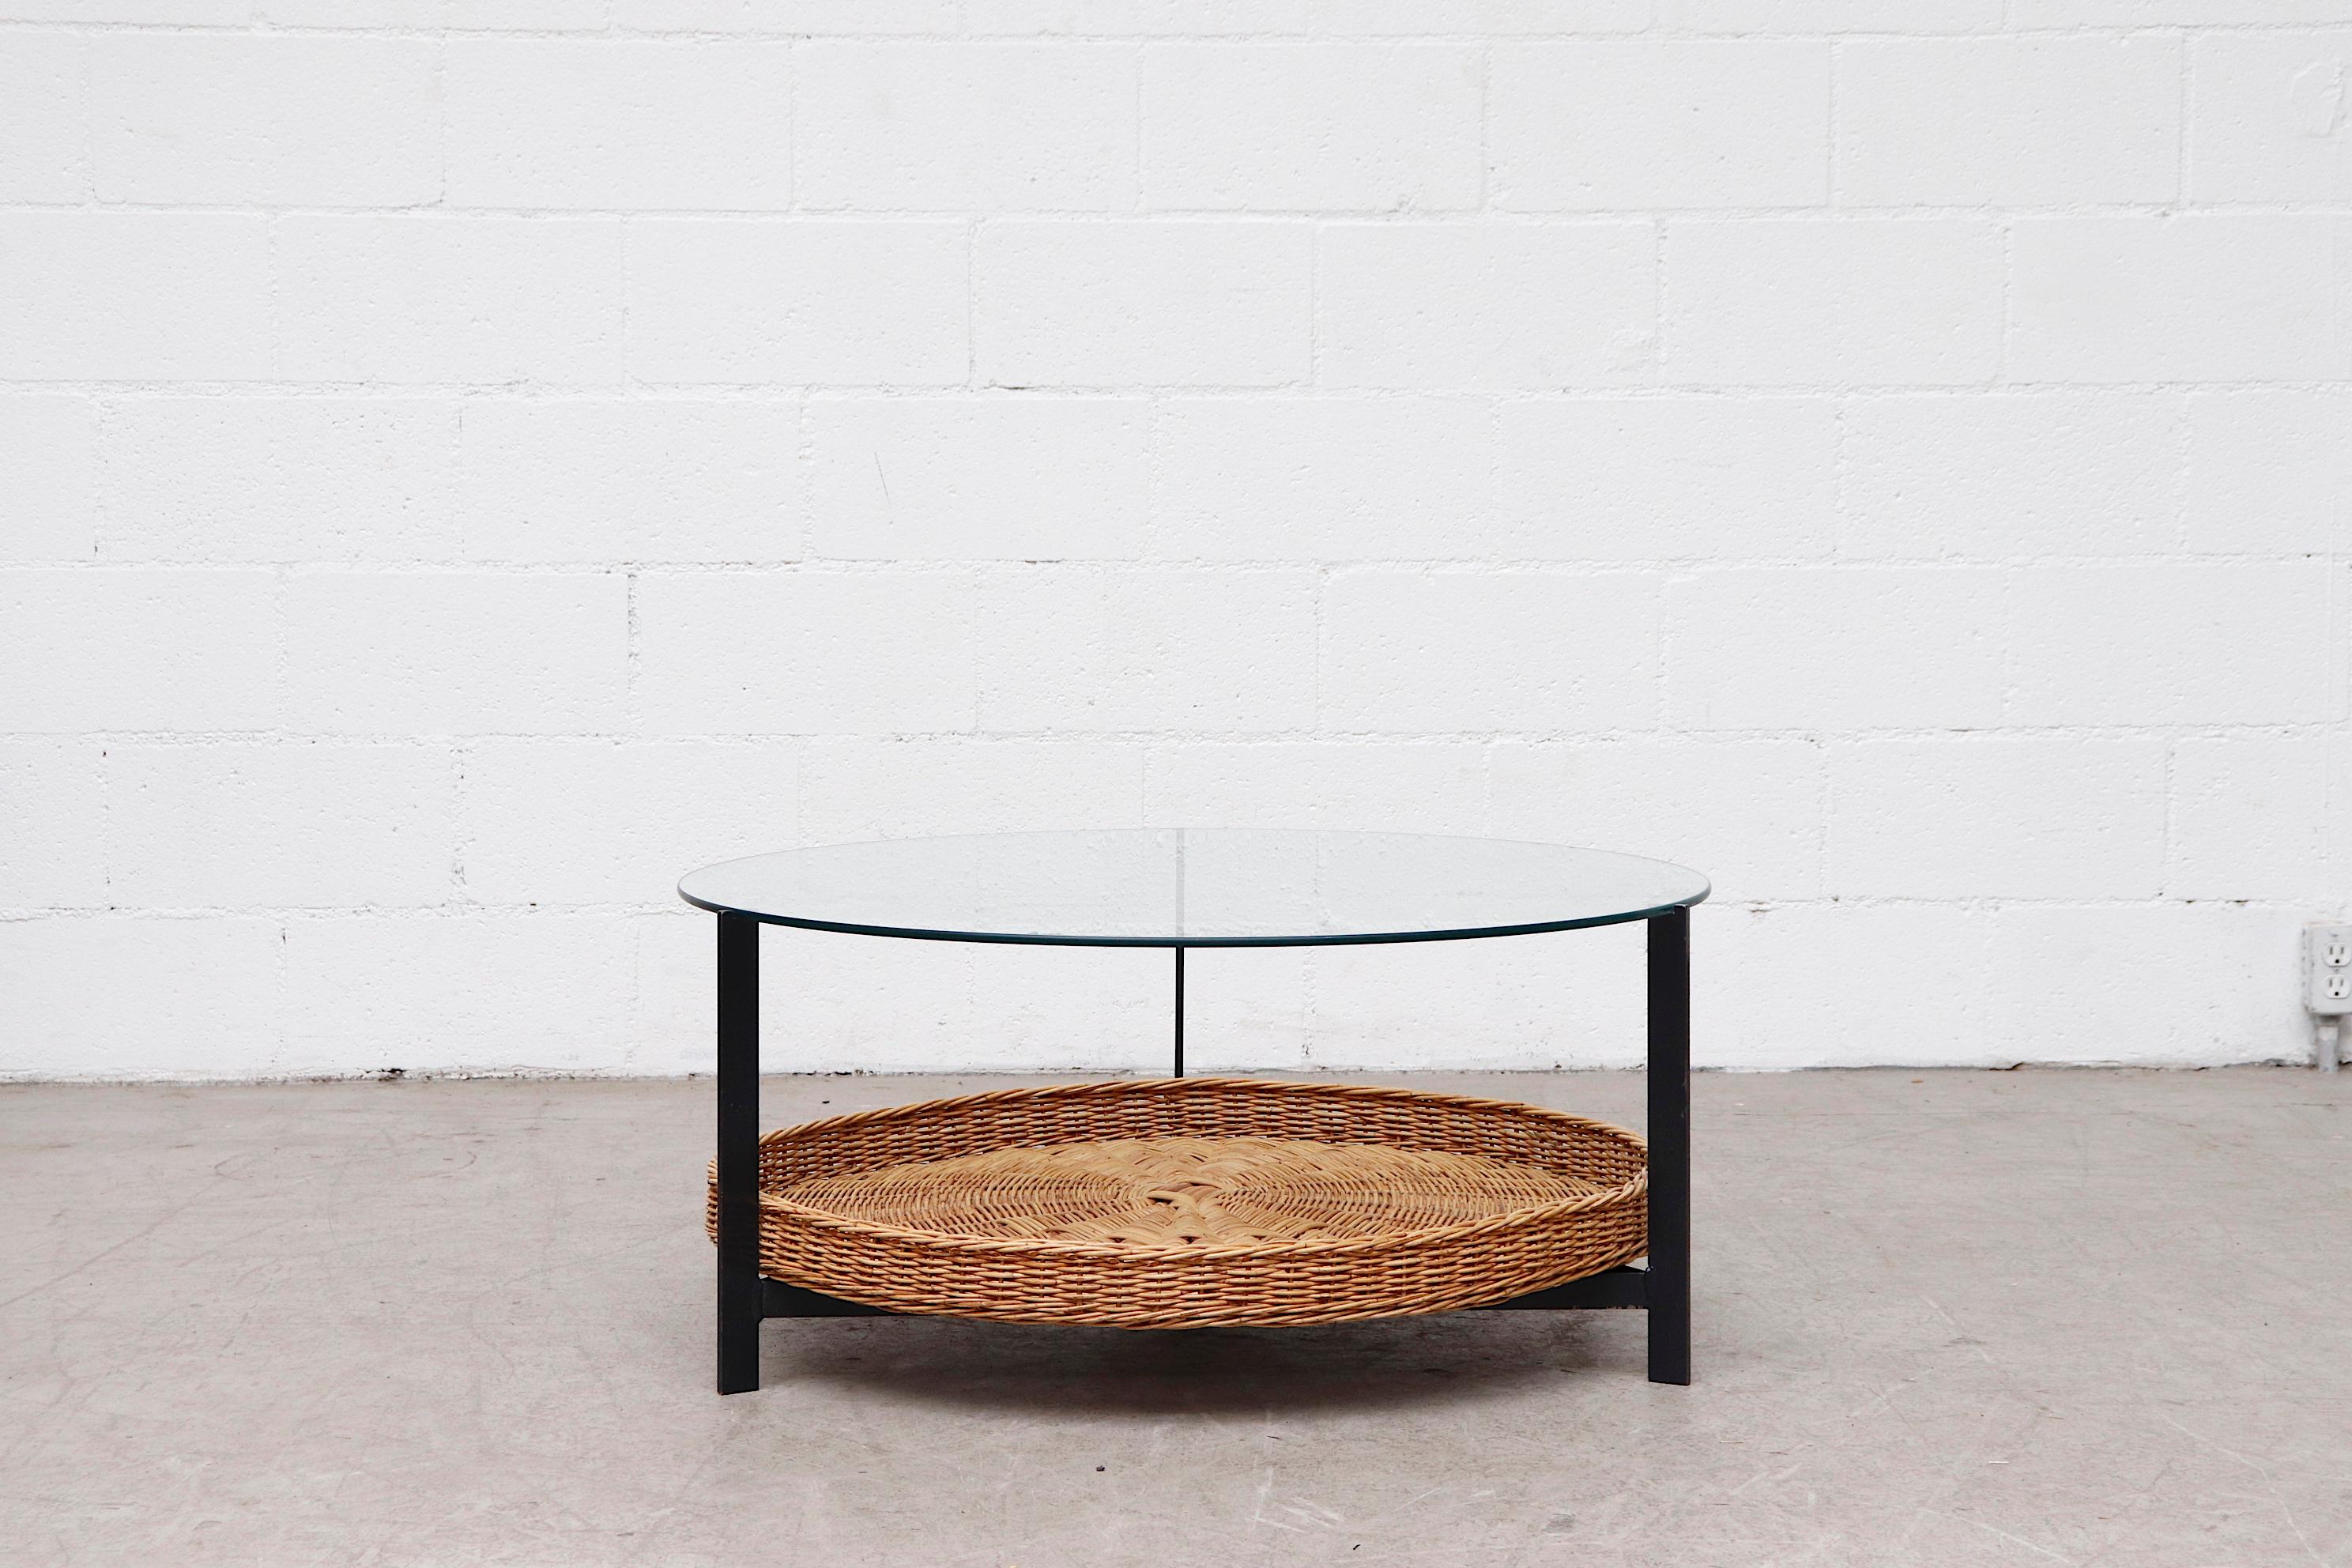 Midcentury round glass coffee table with lower woven wicker basket on charcoal grey enameled metal frame and round plate glass. In original condition with heavy patina to the frame and glass. Visible wear and scratching consistent with its age and